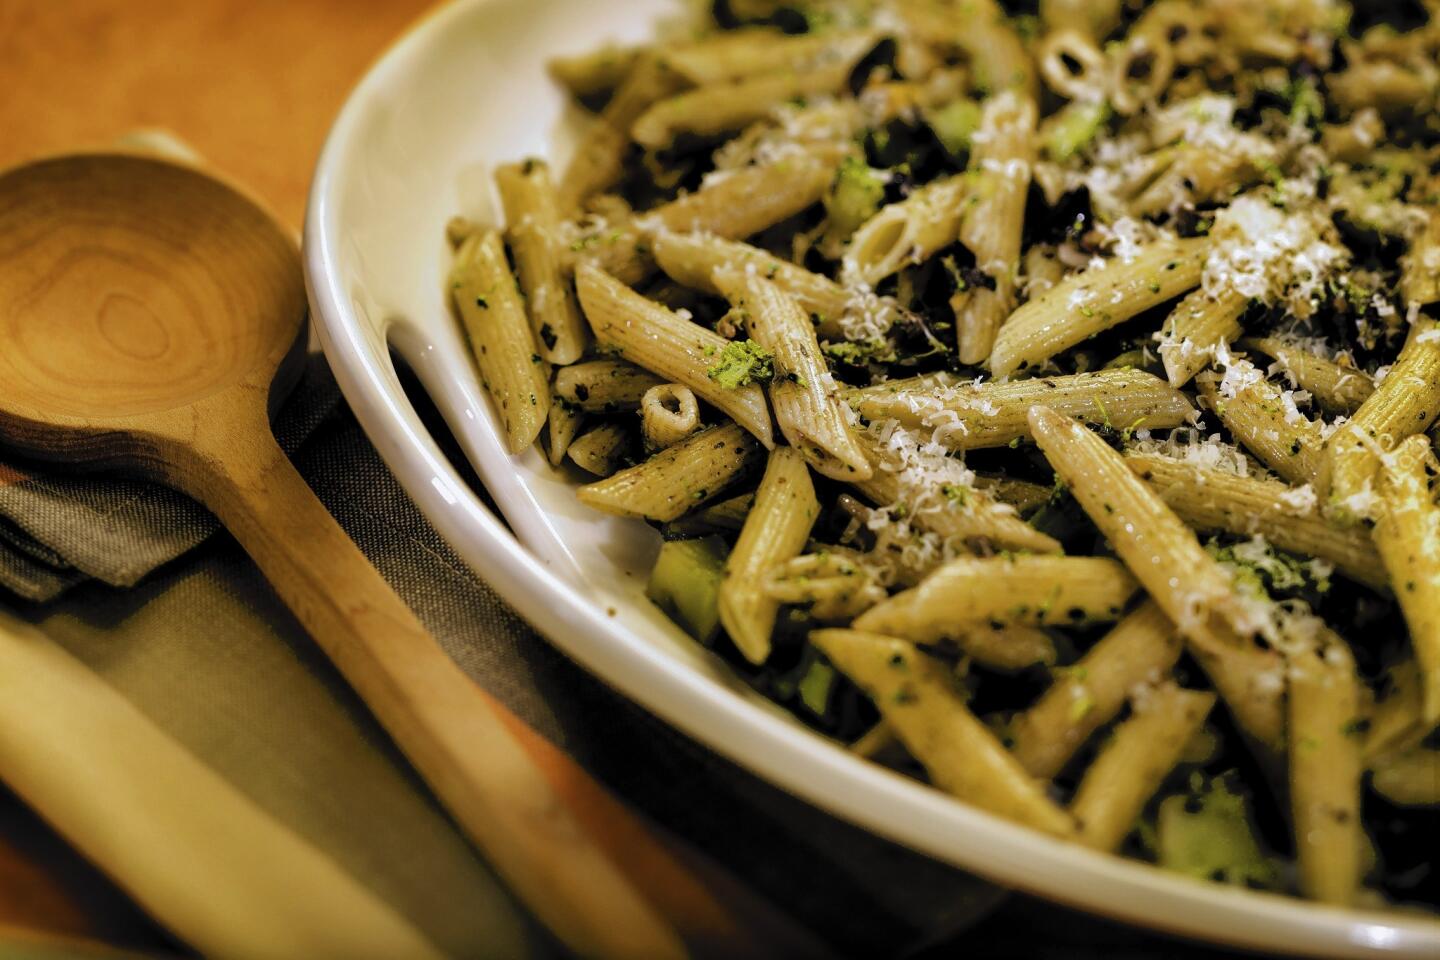 Pasta with broccoli, olives and pistachios